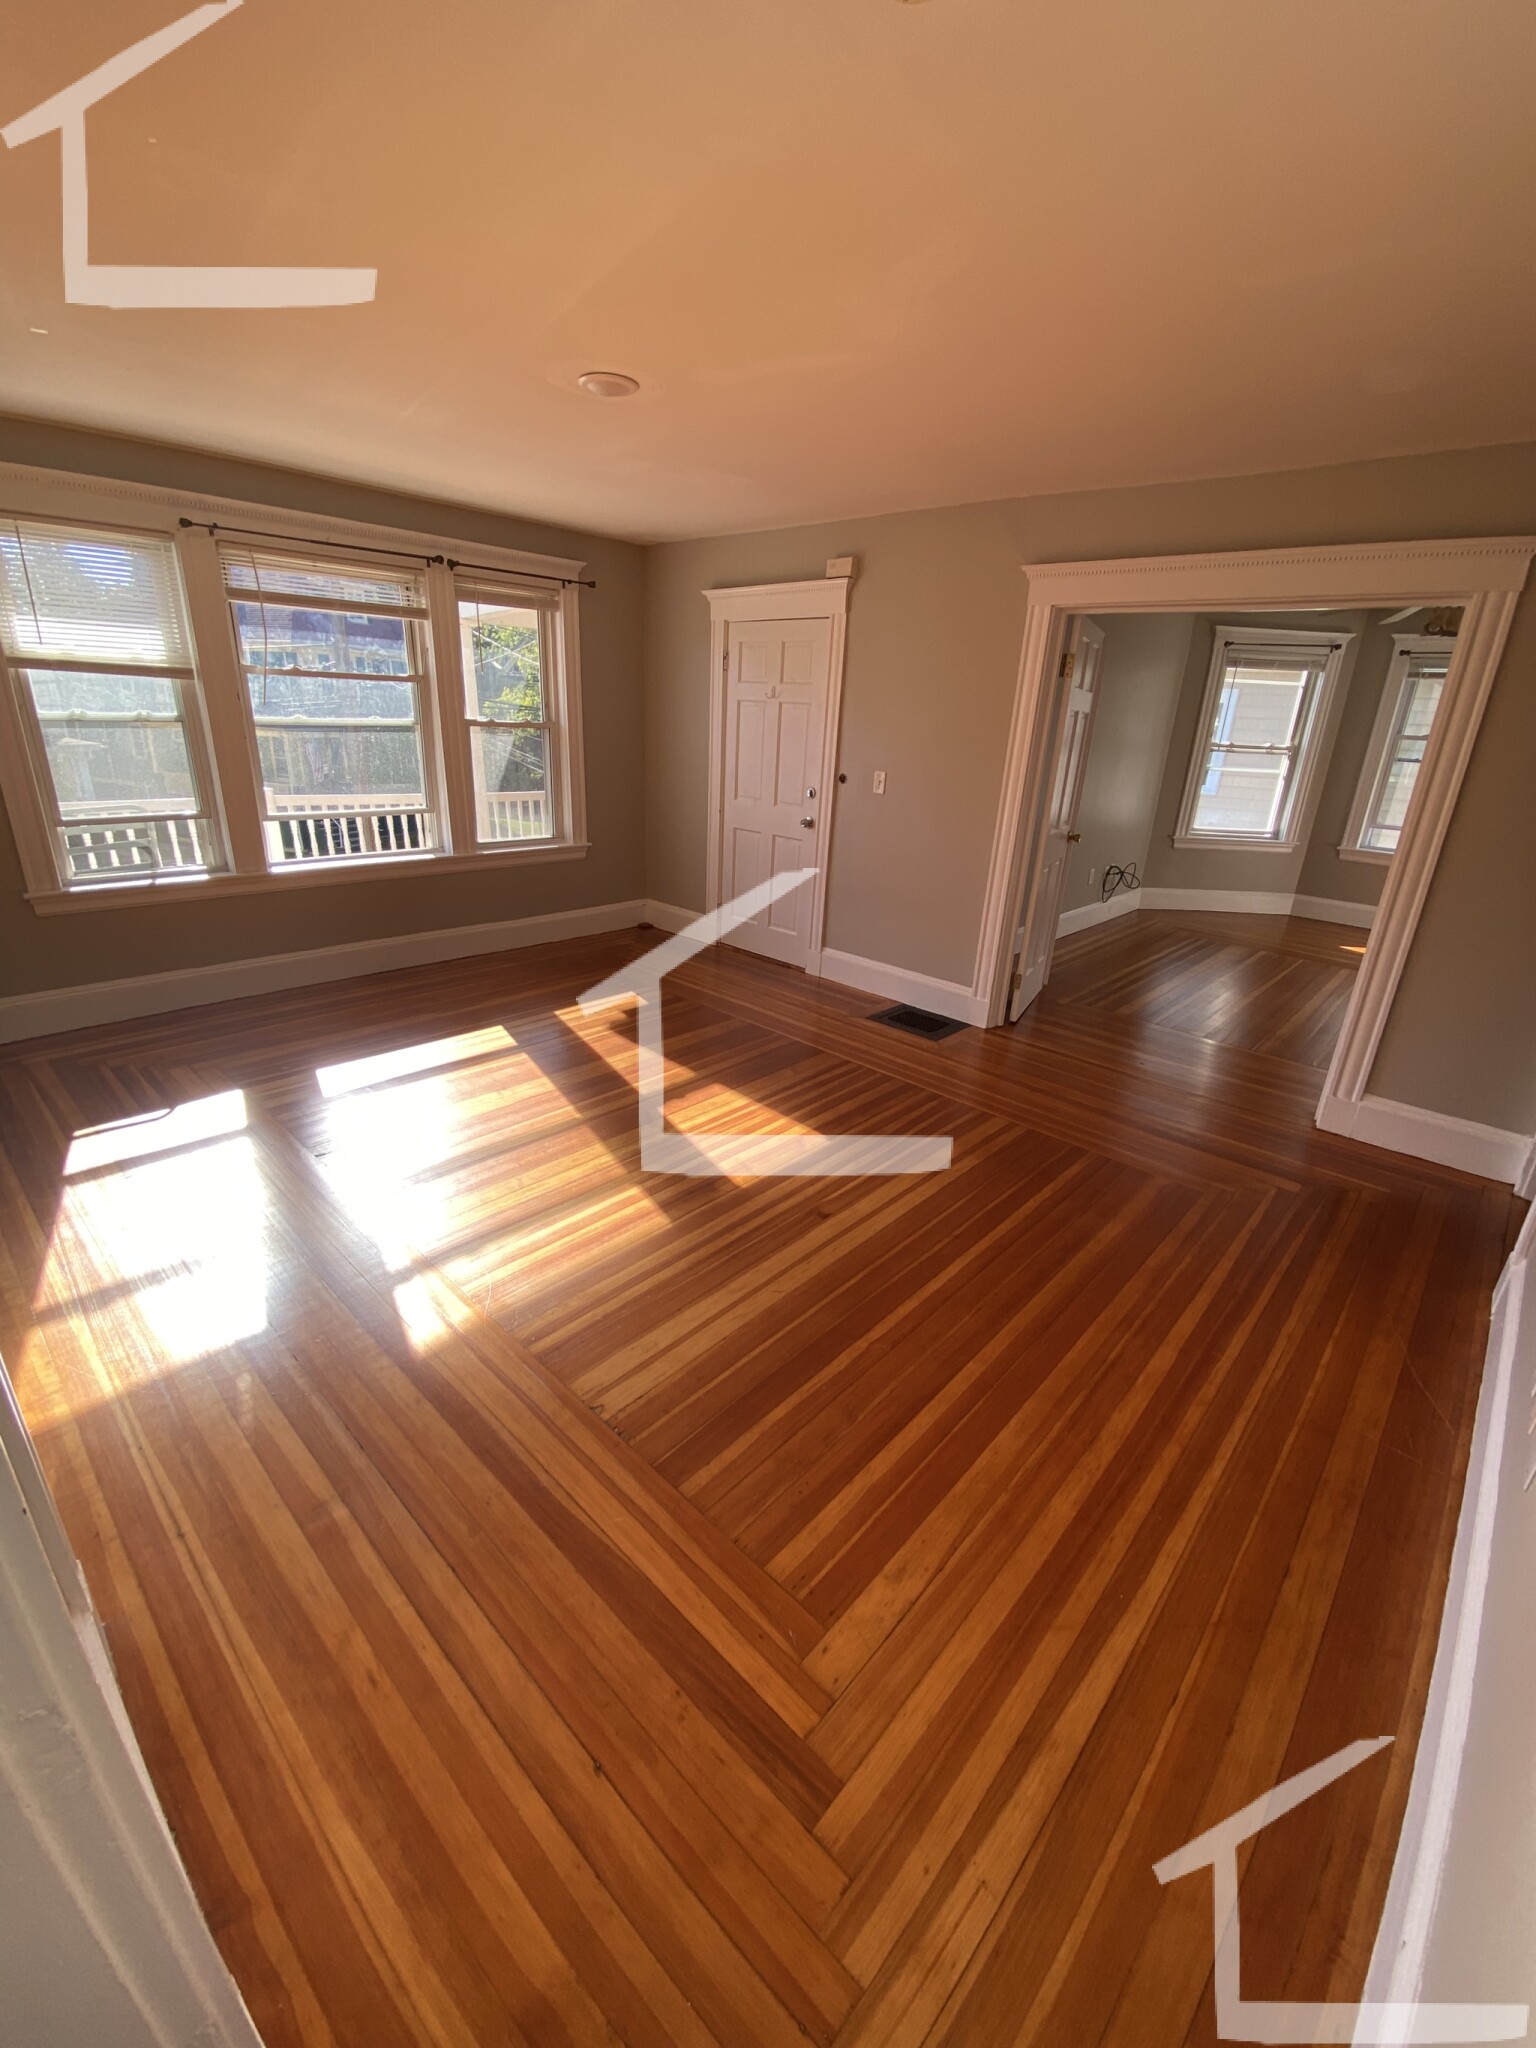 Photos of apartment on Rockview Rd.,Quincy MA 02169